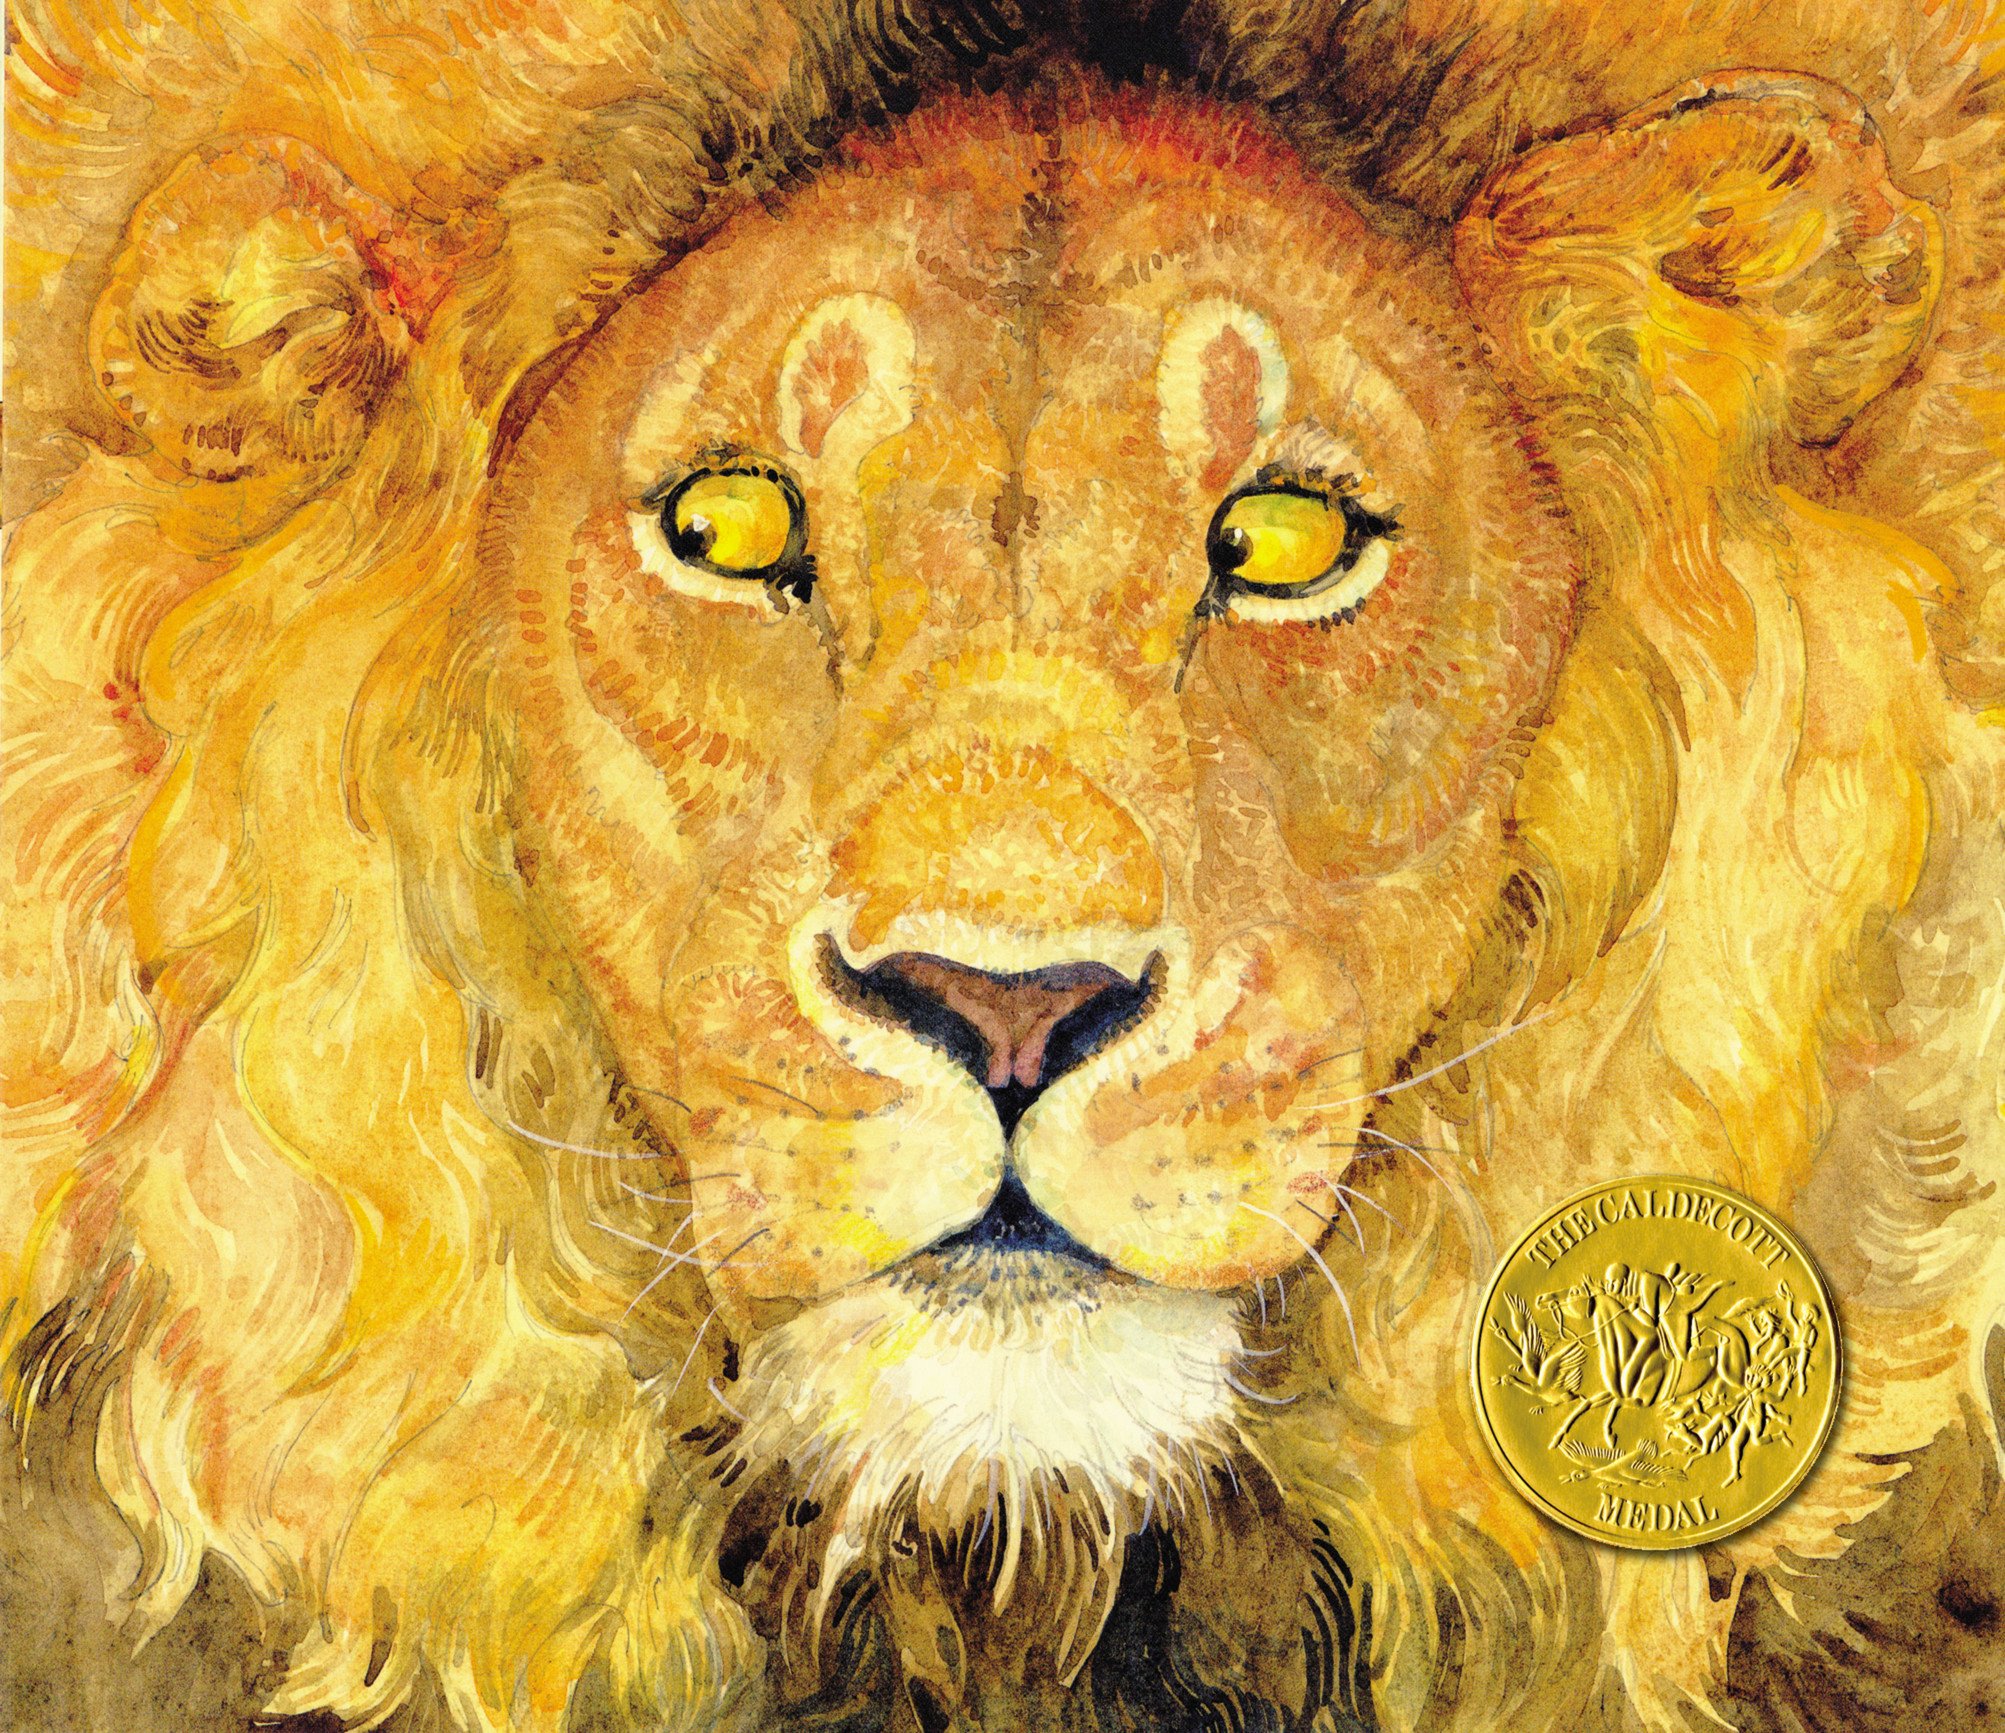 The cover art of The Lion and the Mouse, featuring a close up illustration of a lion's face